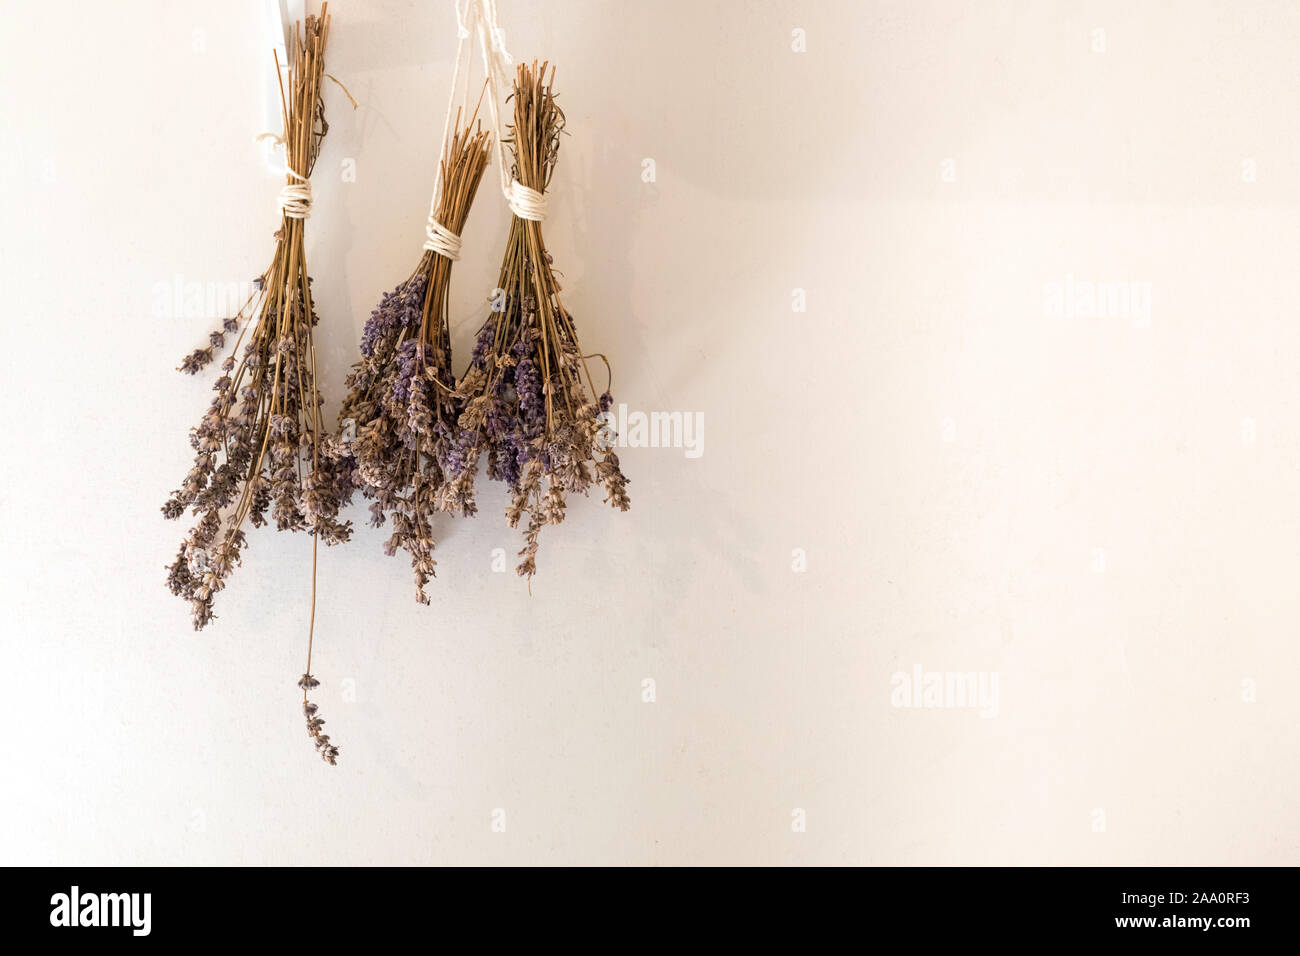 Lavender bunches hung up to dry Stock Photo